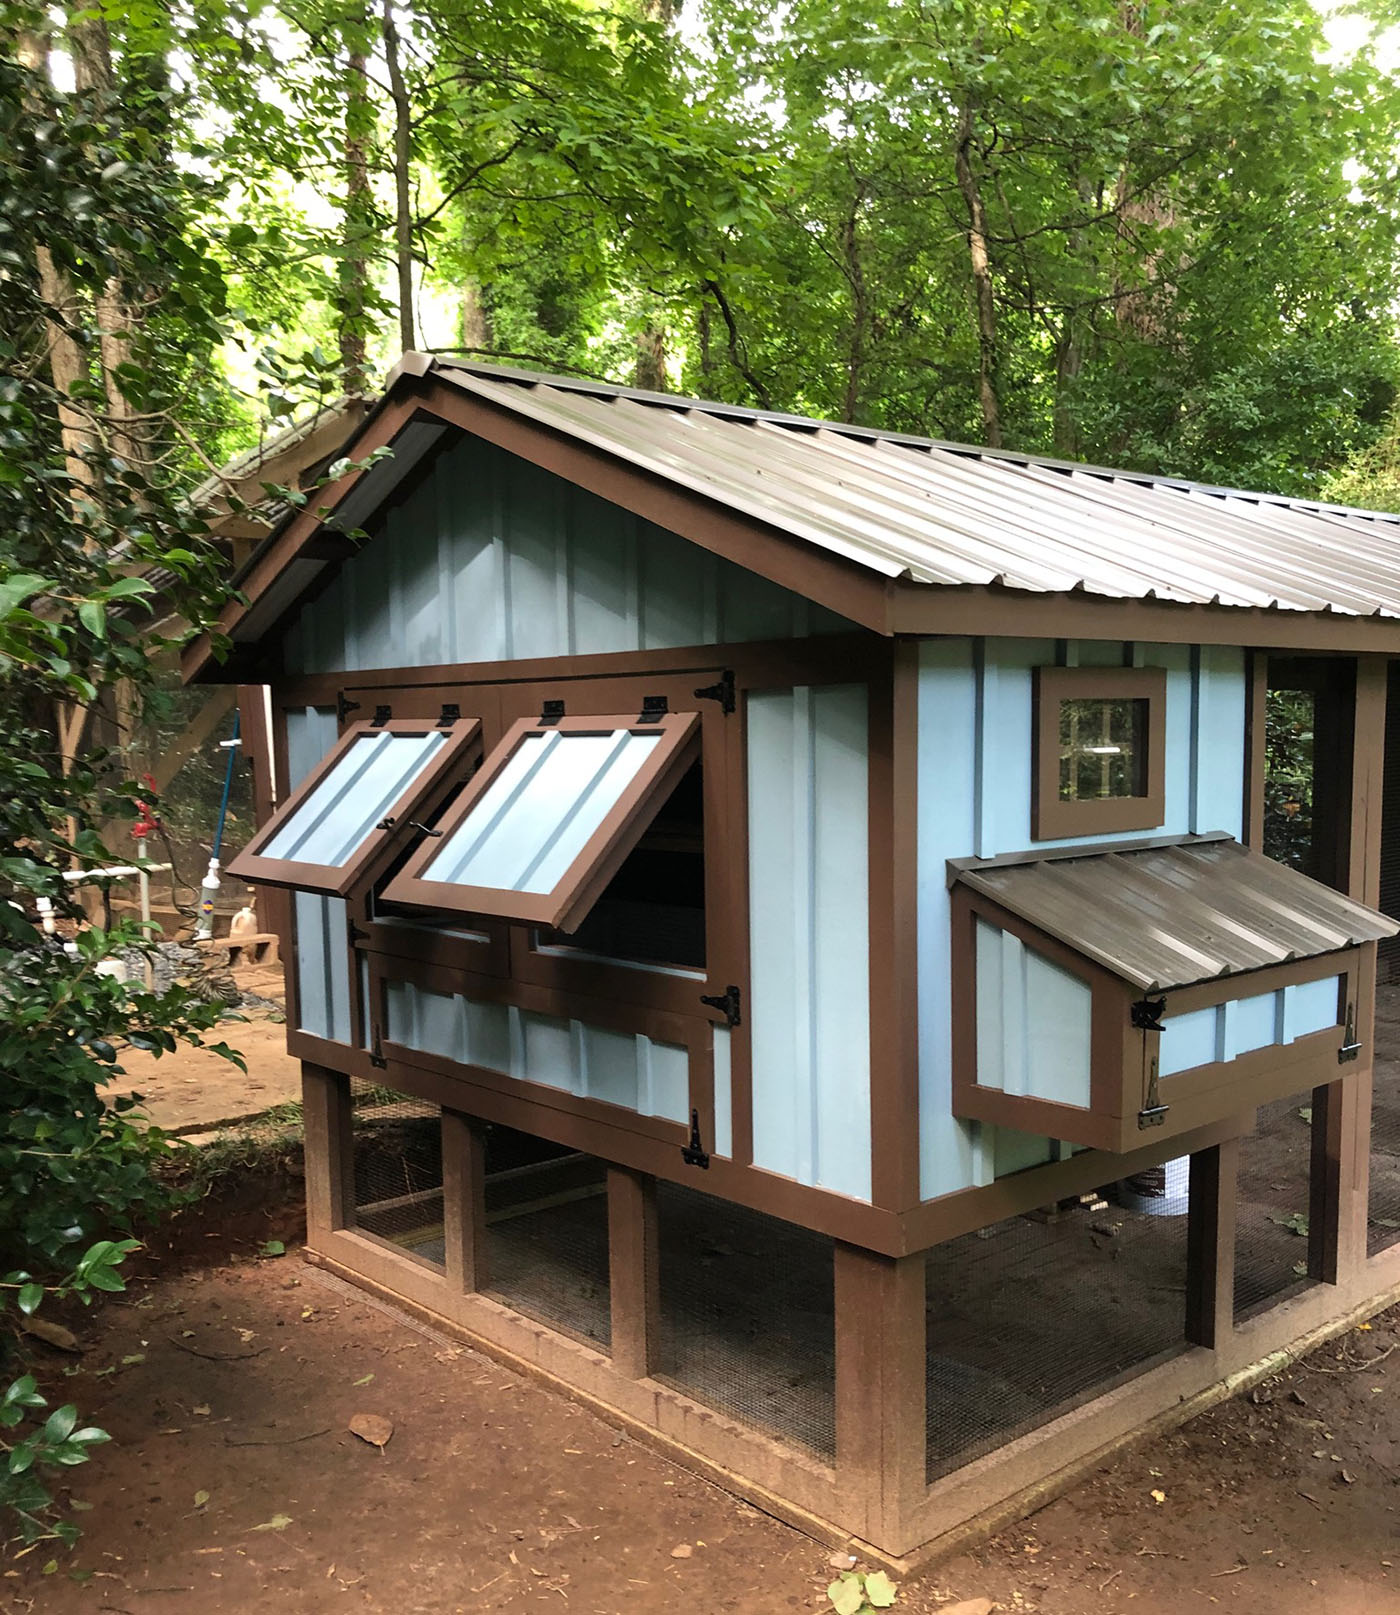 8’x24′ Carolina Coop in Atlanta, Georgia with board and batten siding, two-tone paint job, and sandwiched wall construction